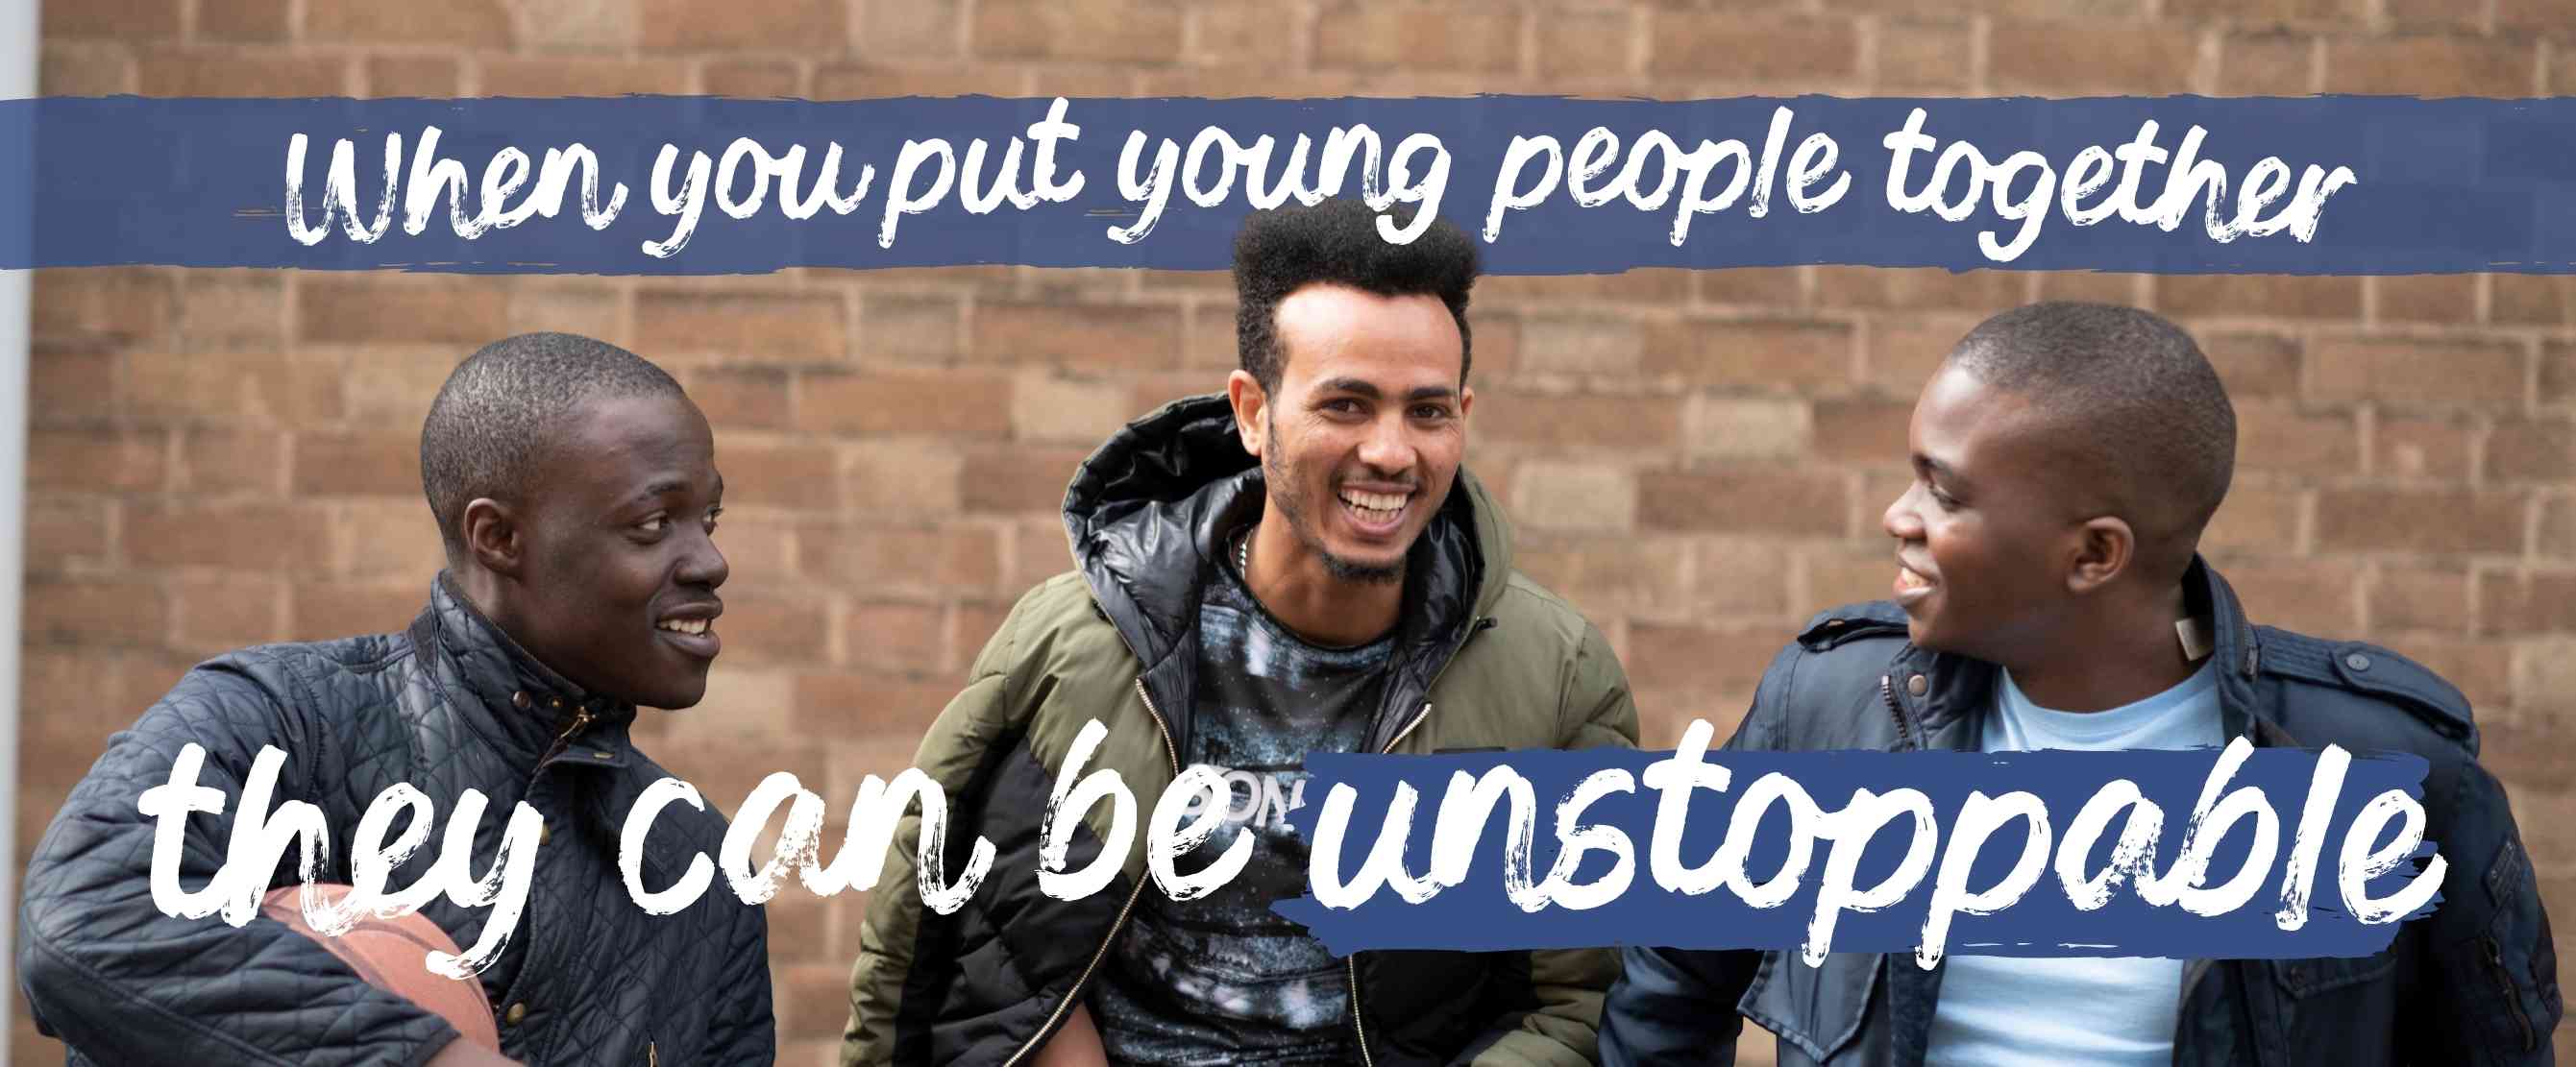 When you put young people together they can be unstoppable